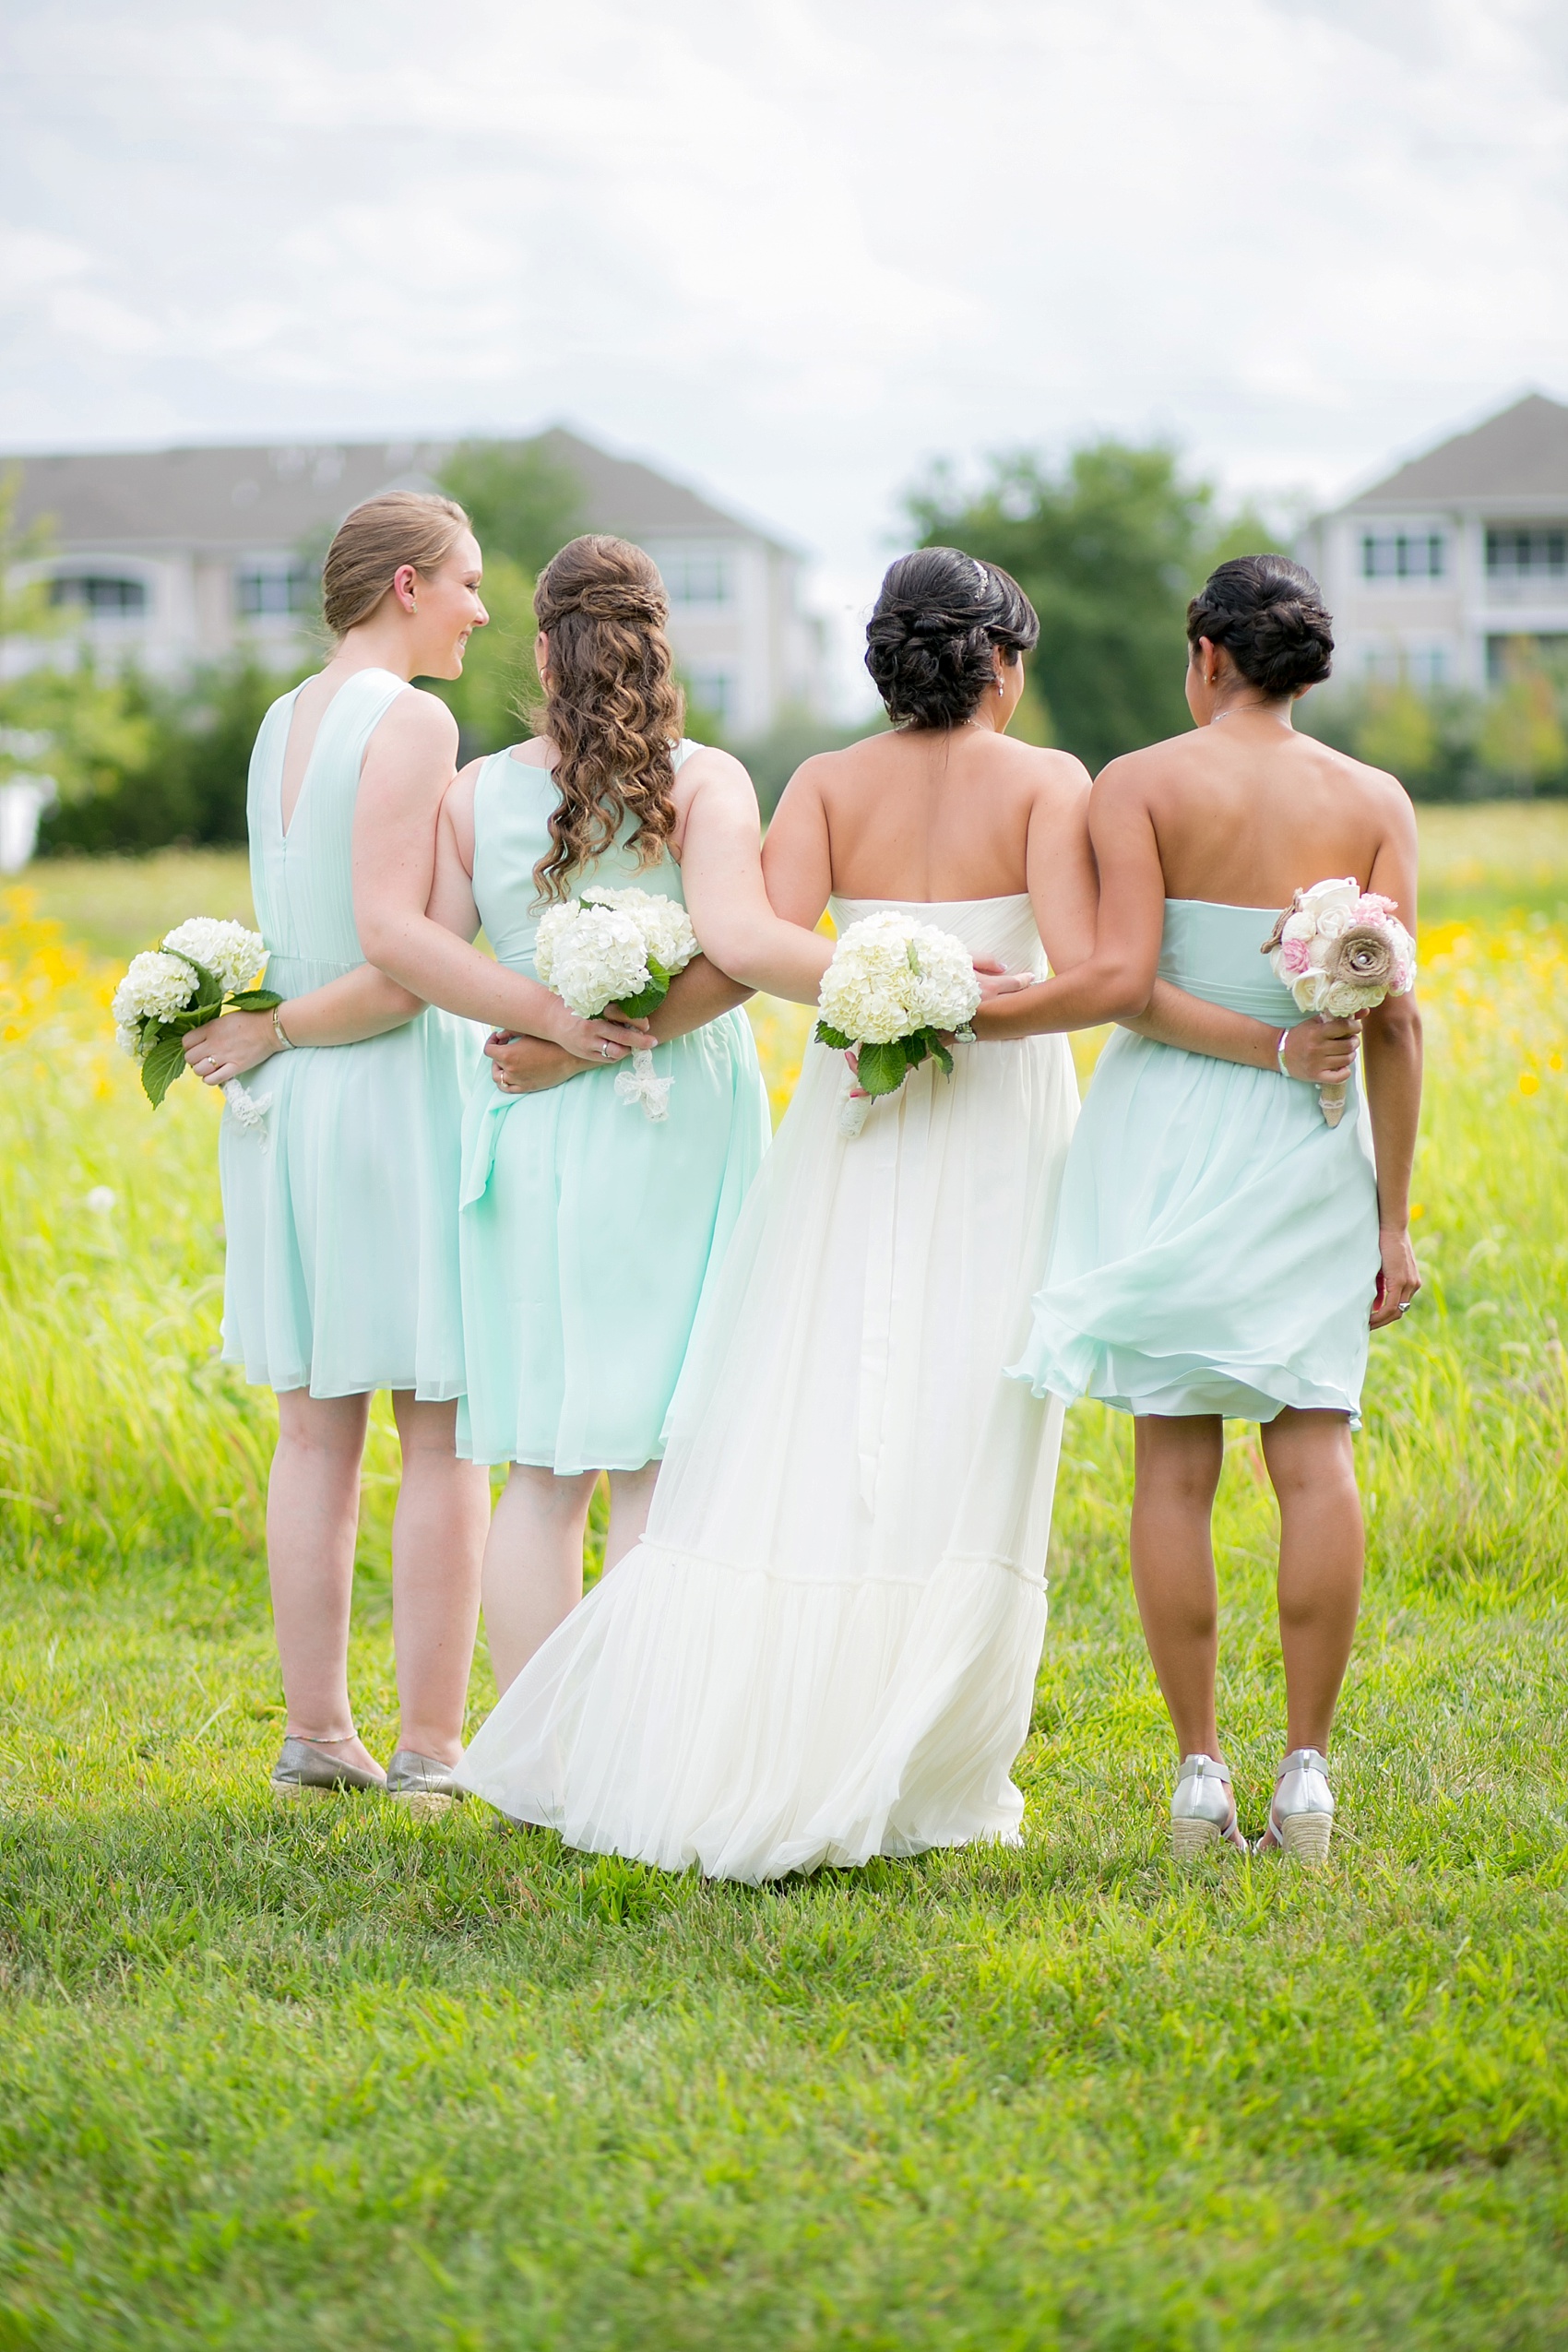 Mint green bridesmaids dresses and BHLDN wedding gown for a summer vineyard wedding at Hopewell Valley Vineyards. Photos by New Jersey wedding photographer, Mikkel Paige Photography.